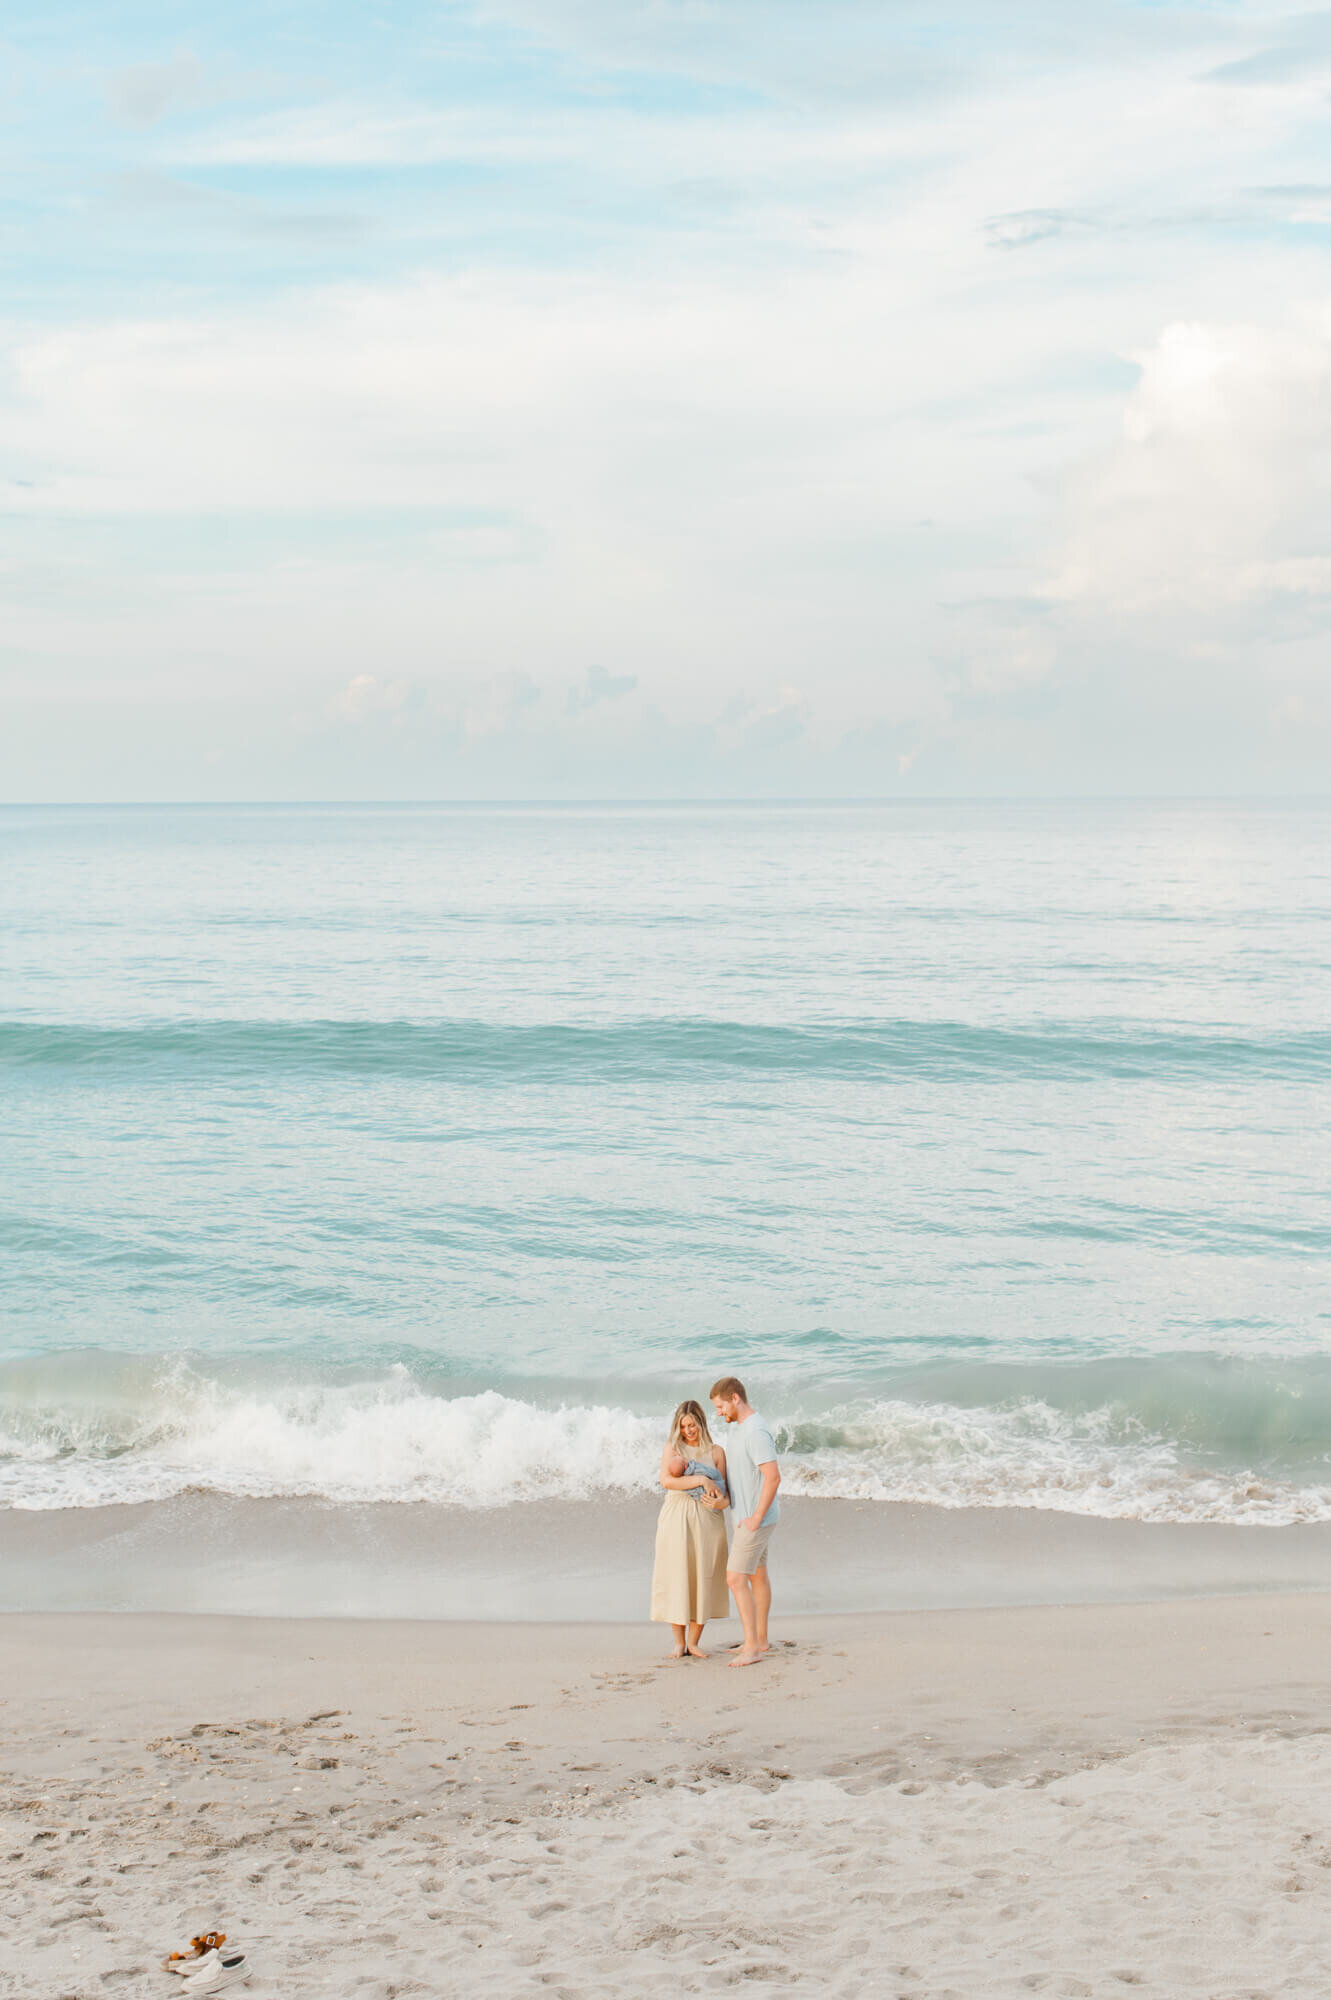 Stunning image of beautiful Vero Beach with parents standing down by the shoreline holding their newborn baby boy!